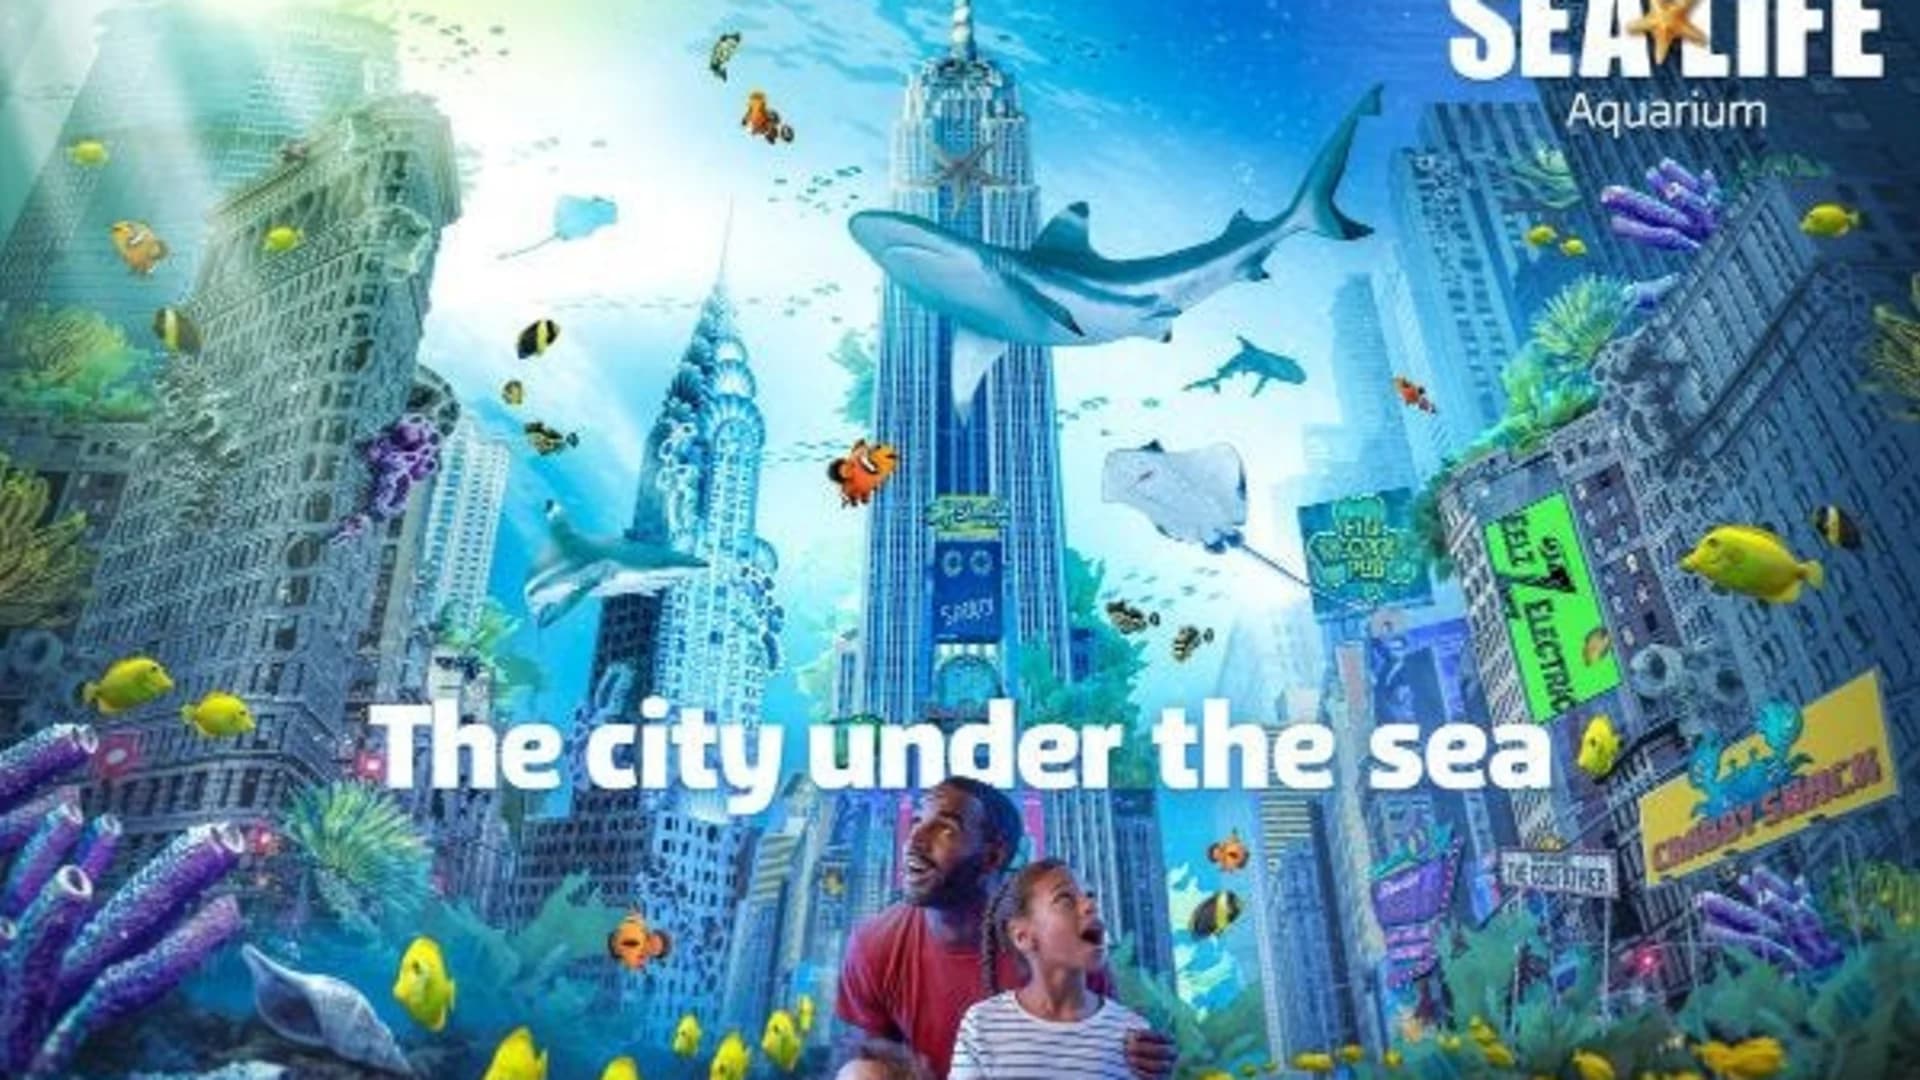 PHOTOS: First look at 'City Under the Sea' theme for American Dream aquarium